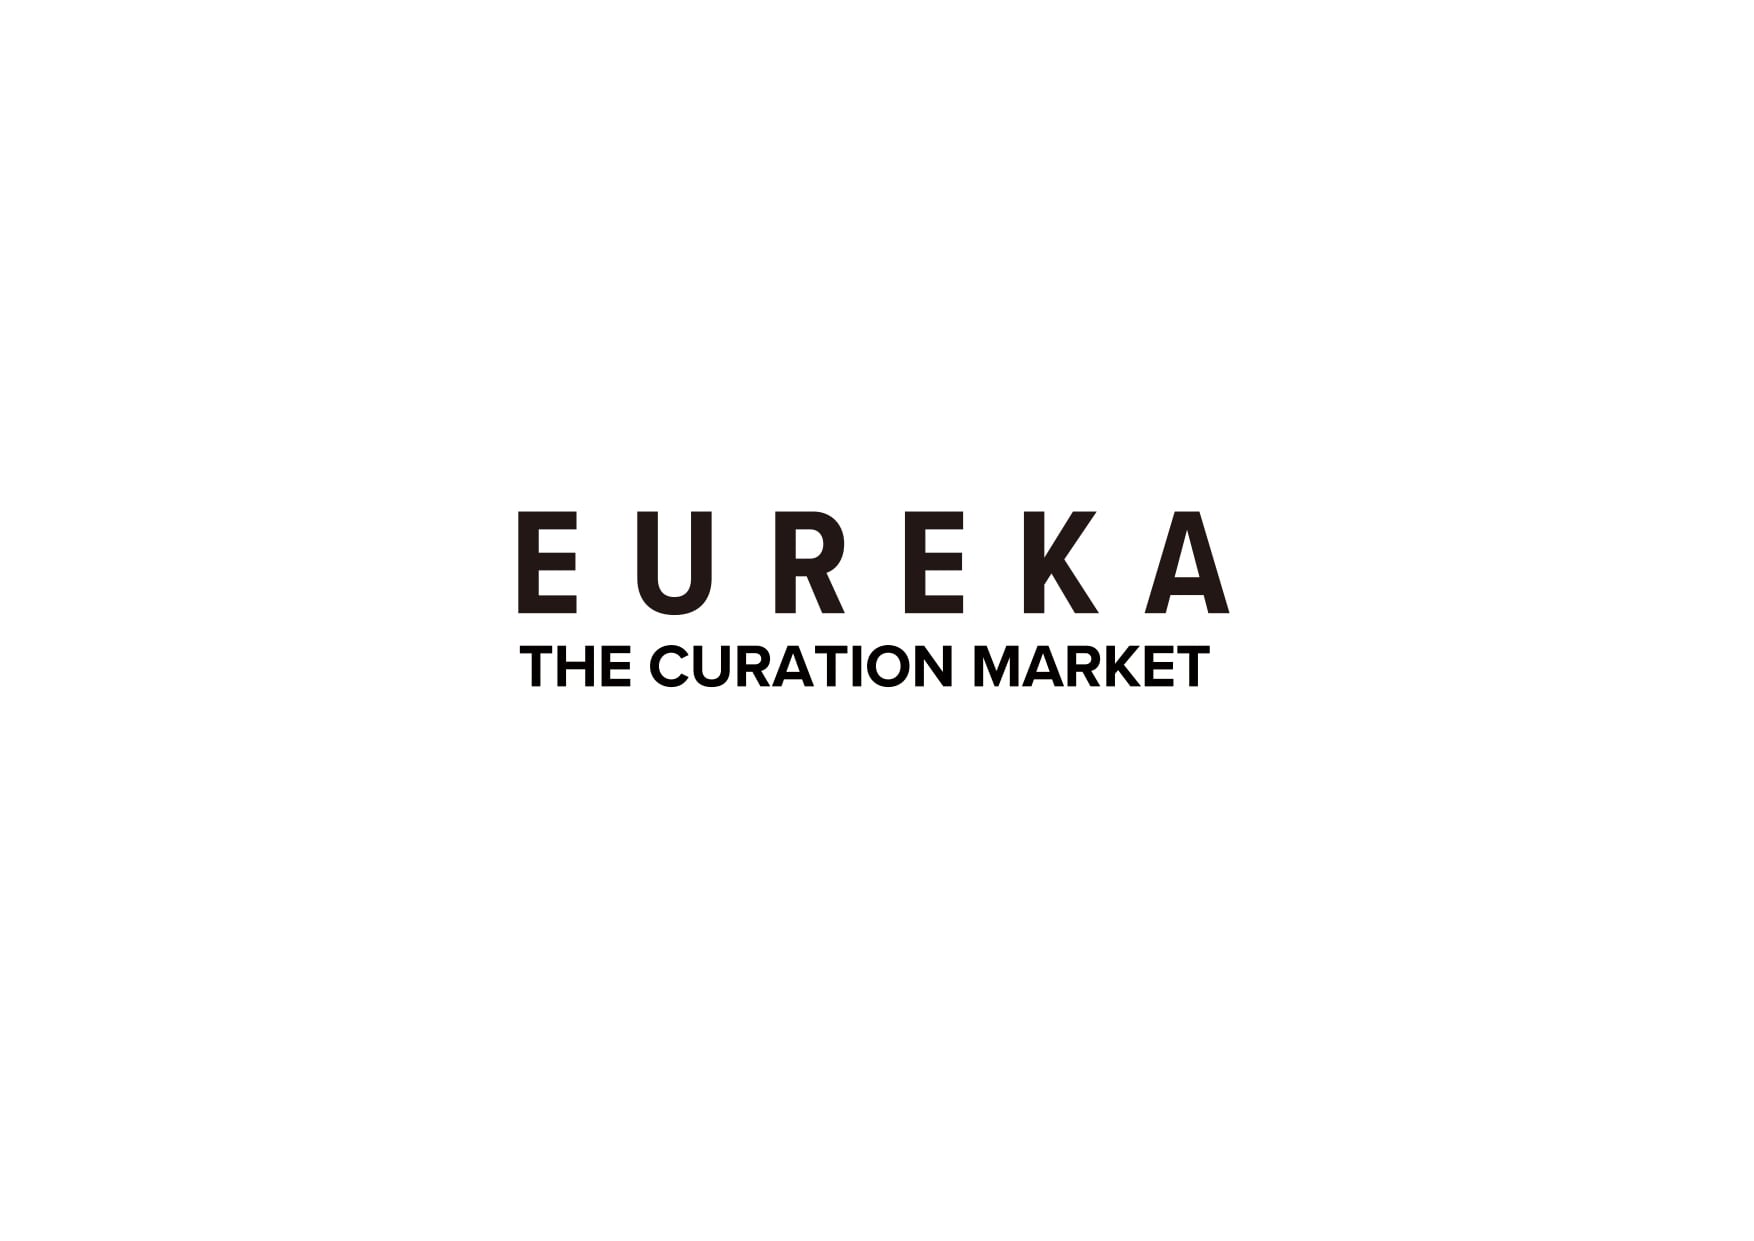 THE CURATION MARKET